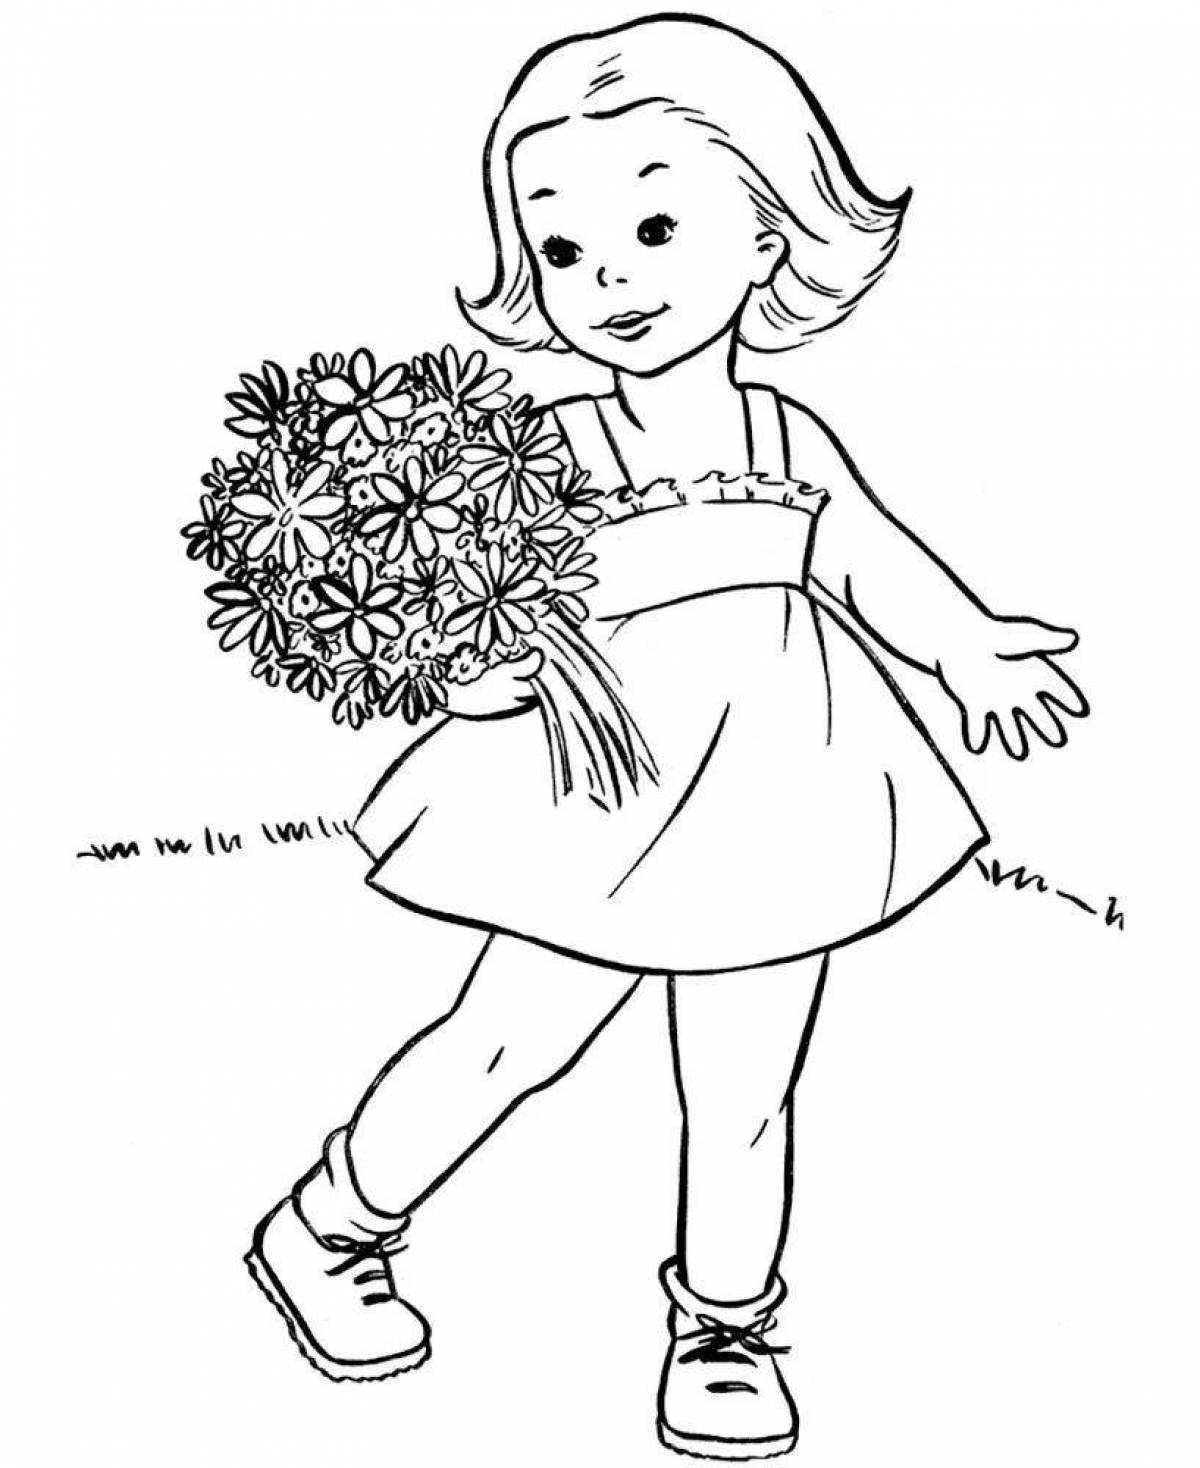 Daughter's animated coloring page